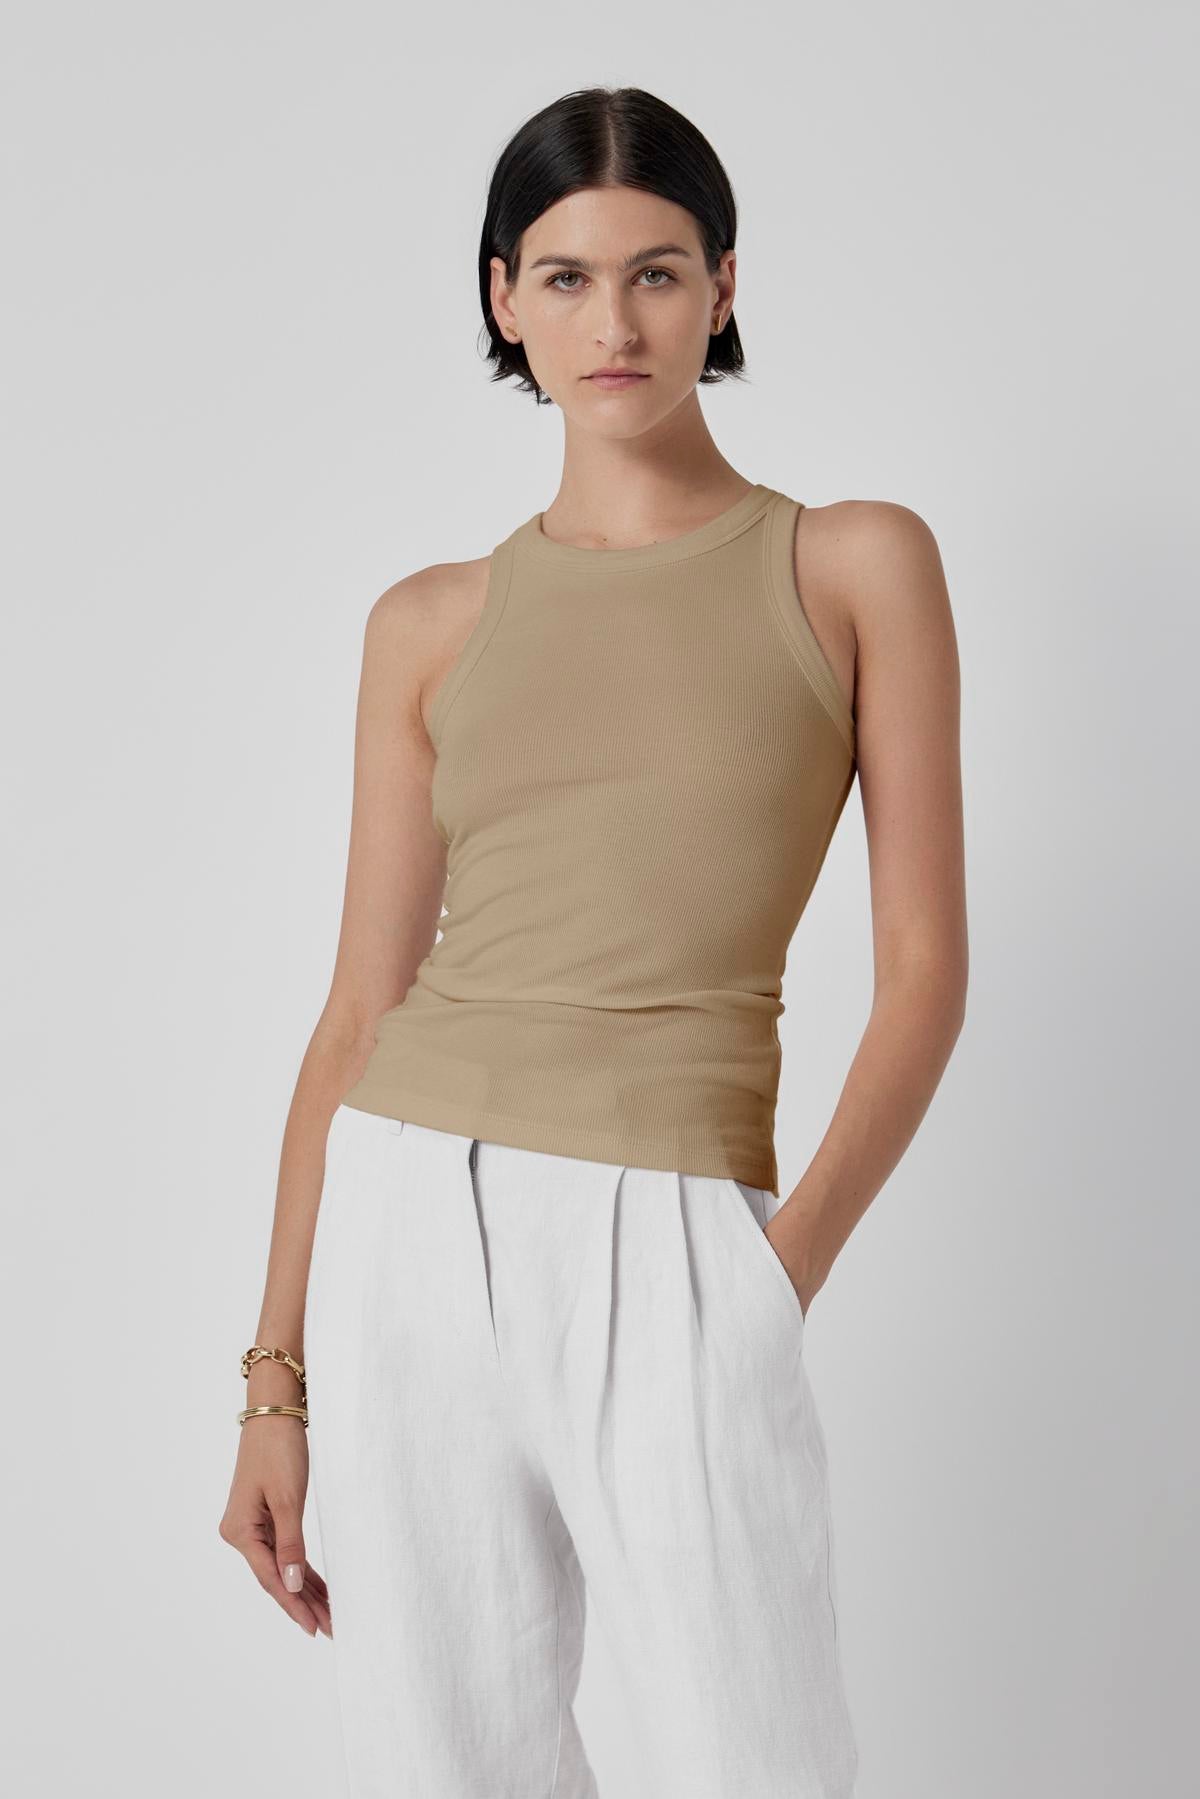 A woman in a beige Velvet by Jenny Graham Cruz tank top and chic white trousers against a light background.-36463435186369